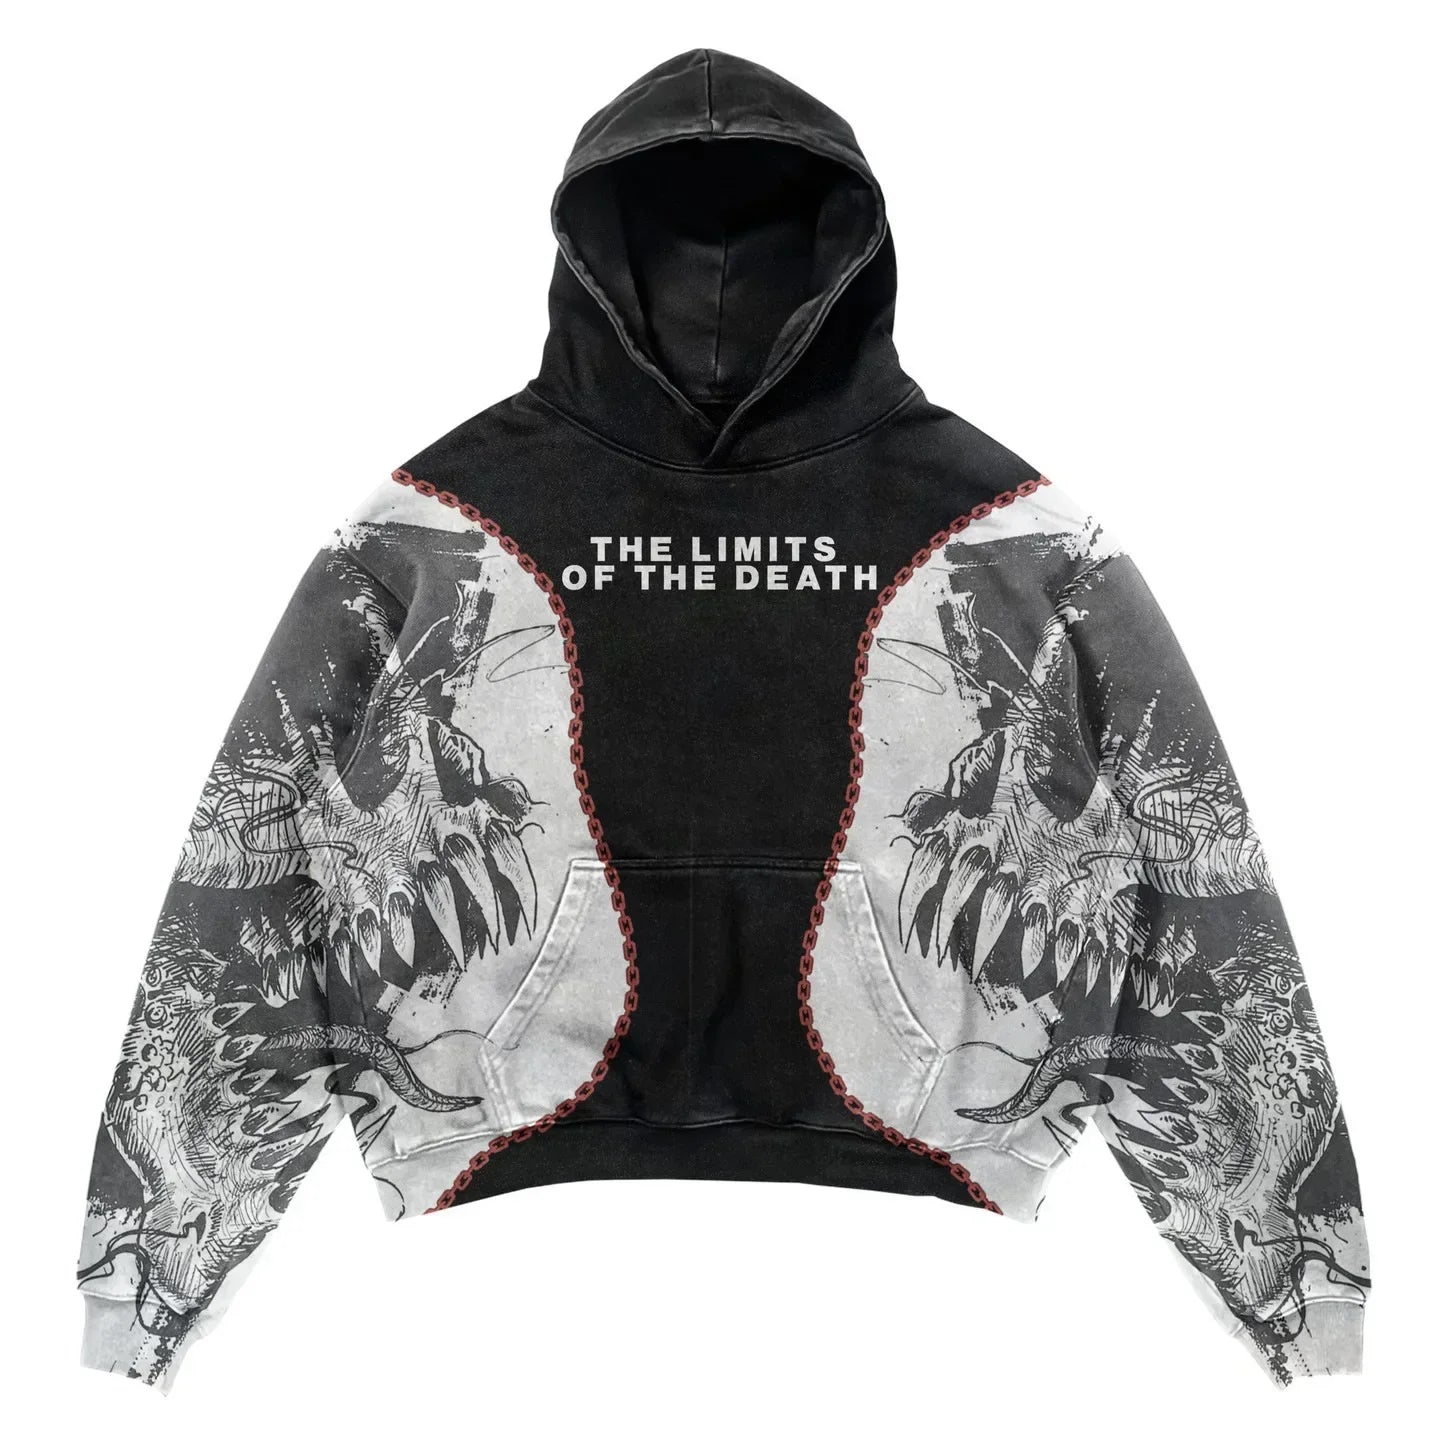 A black men's Explosions Printed Skull Y2K Retro Hooded Sweater Coat Street Style Gothic Casual Fashion Hooded Sweater featuring the text "THE LIMITS OF THE DEATH" on the chest, with graphic designs of skeletal creatures and red accents on both sleeves, perfect for those who love punk style hoodies. By Maramalive™.